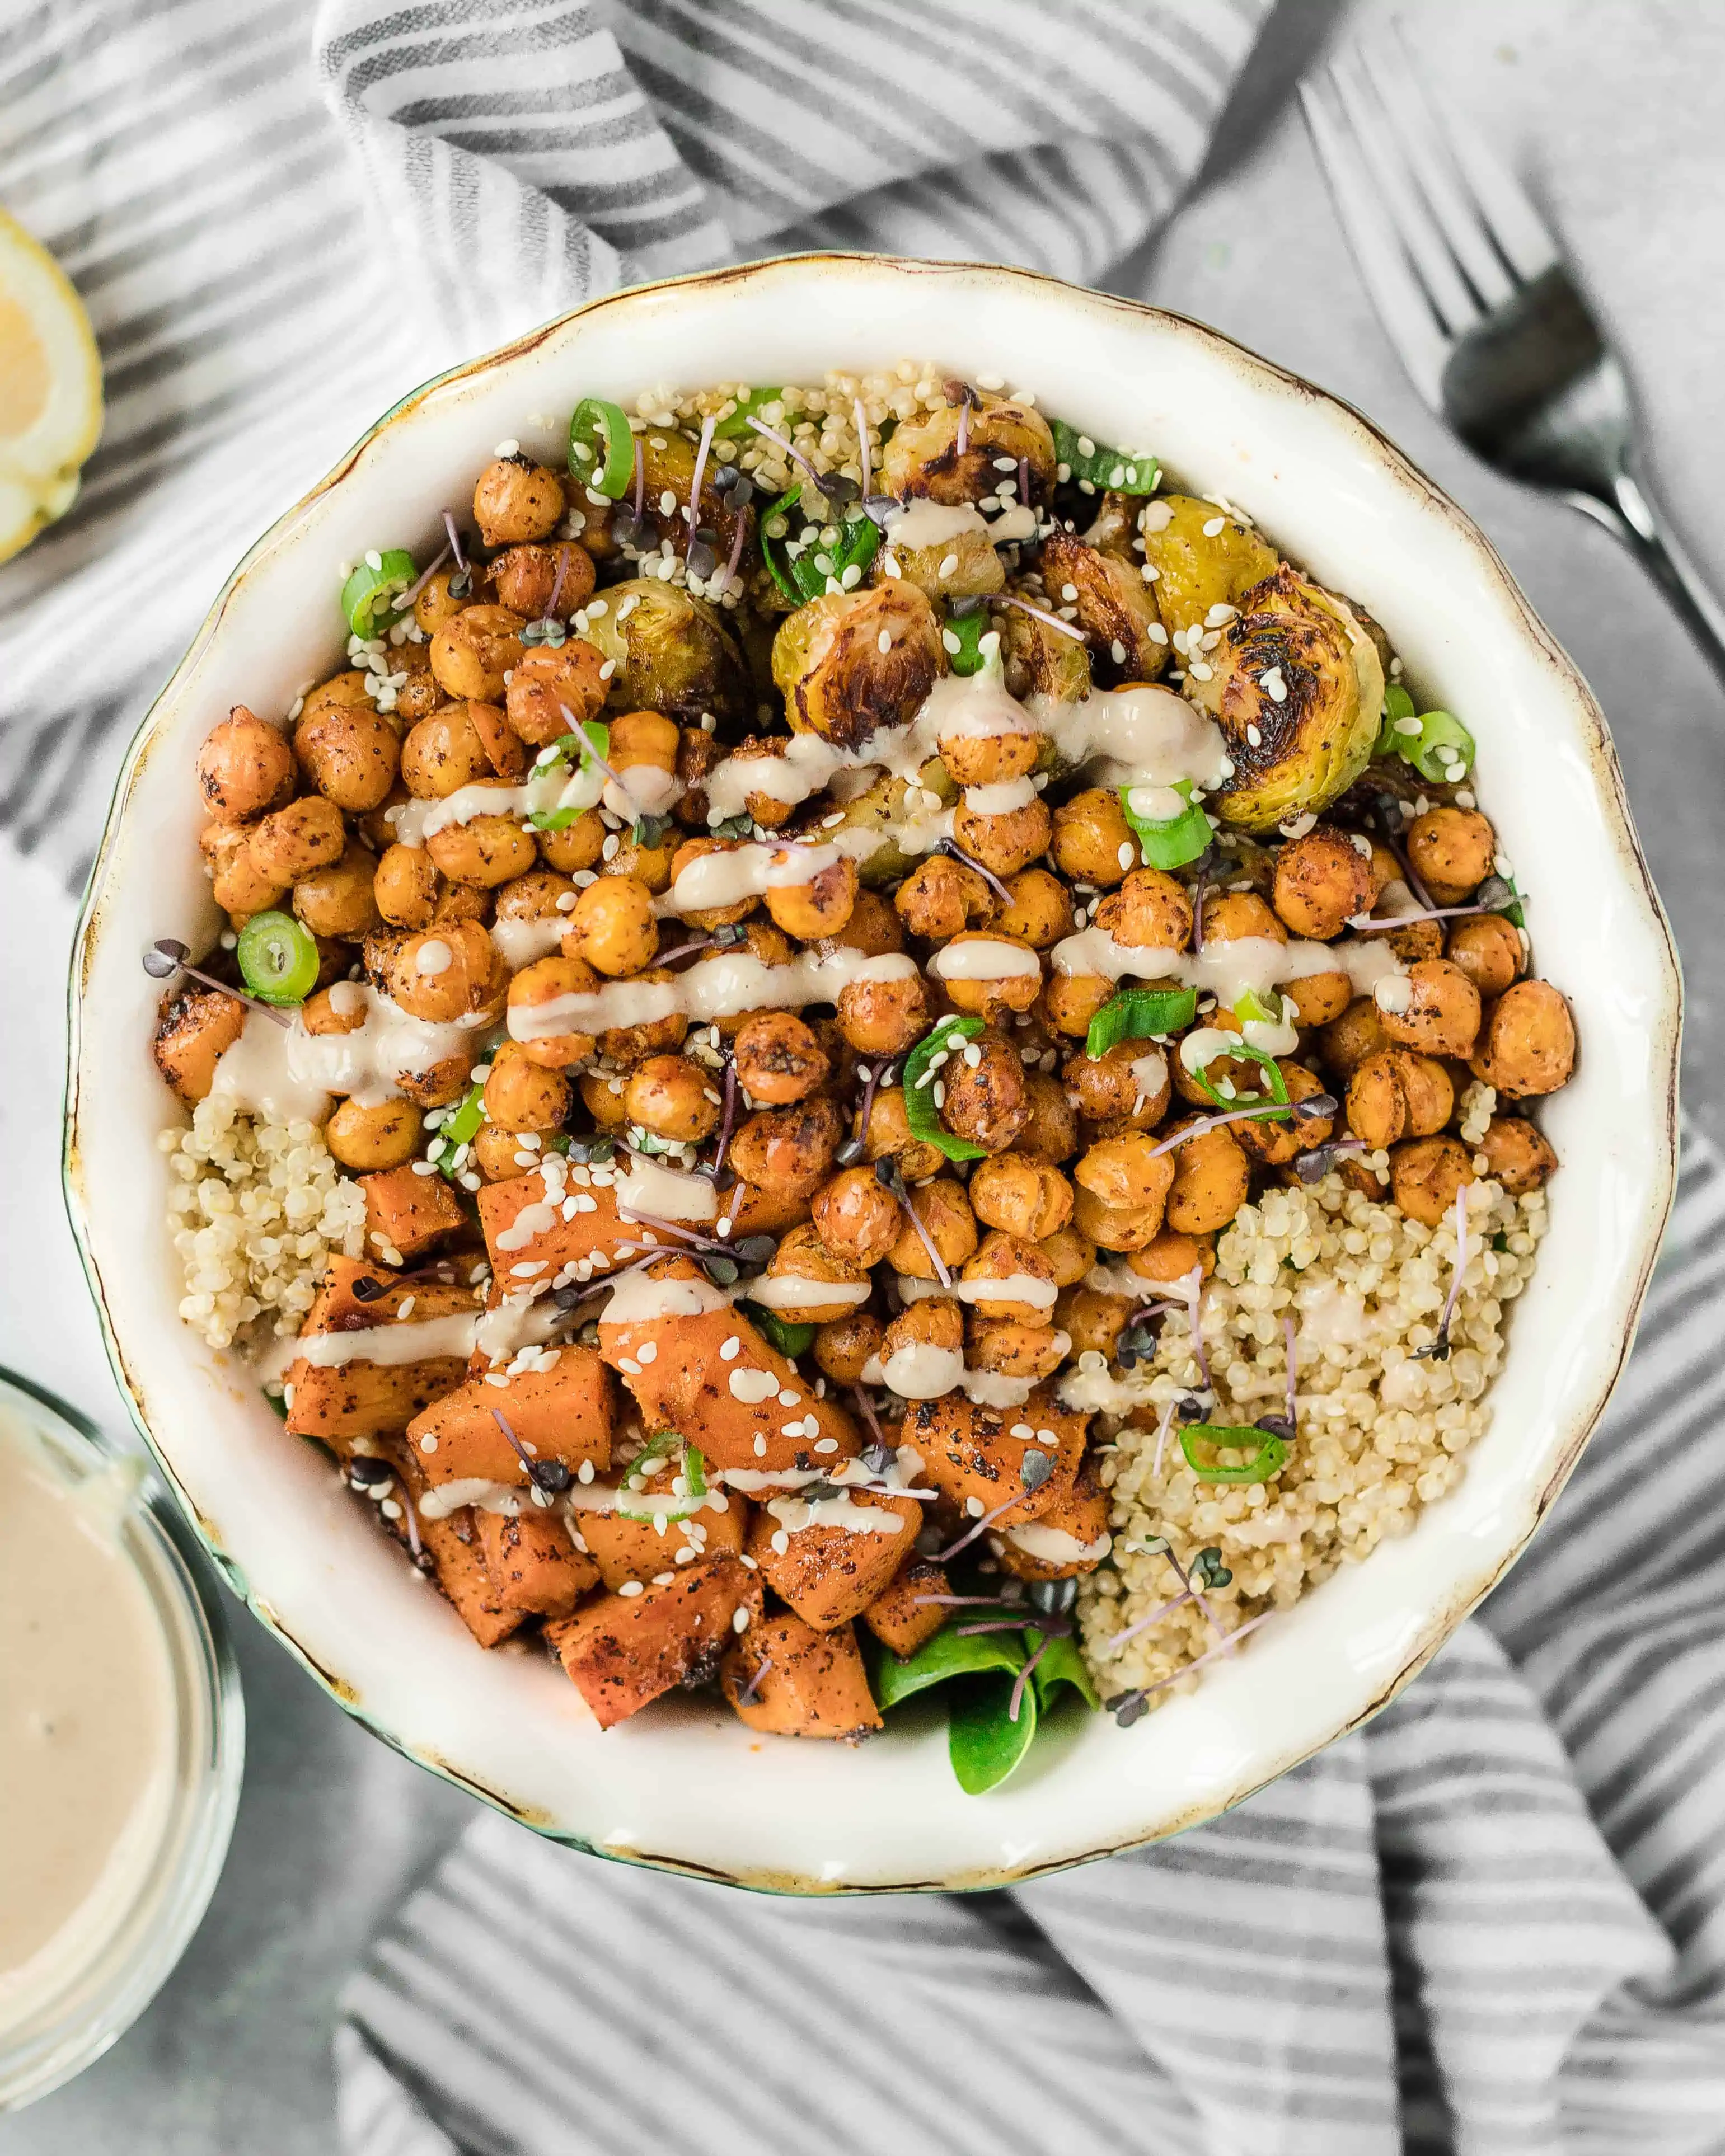 A Simple & Tasty Roasted Vegetable Winter Buddha Bowl with Tahini Dressing